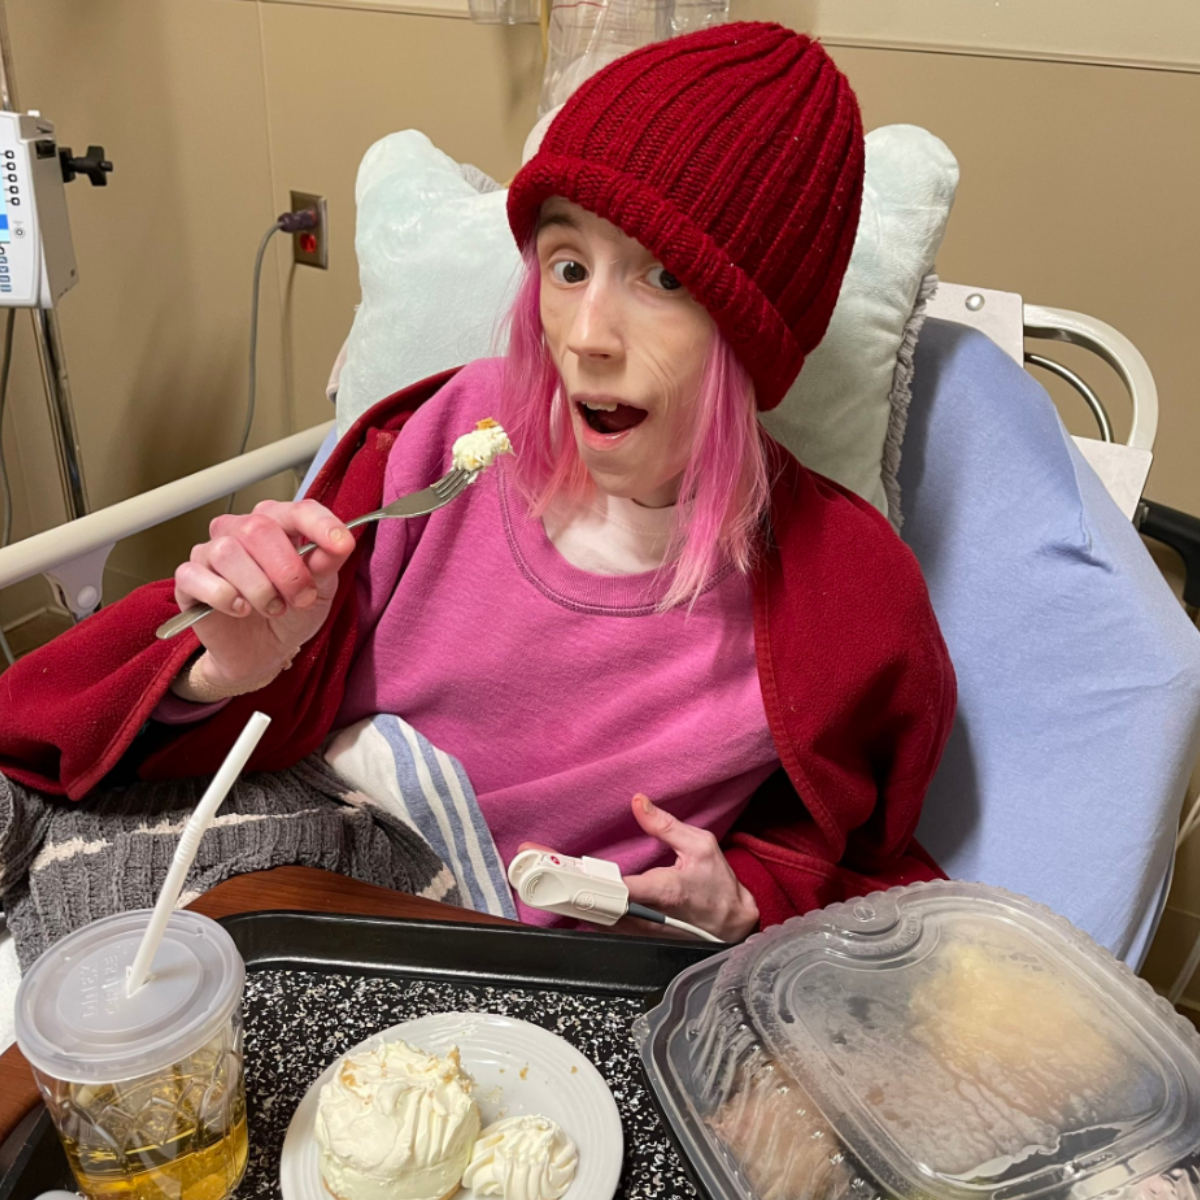 Lora Marsh eating meal in hospital bed